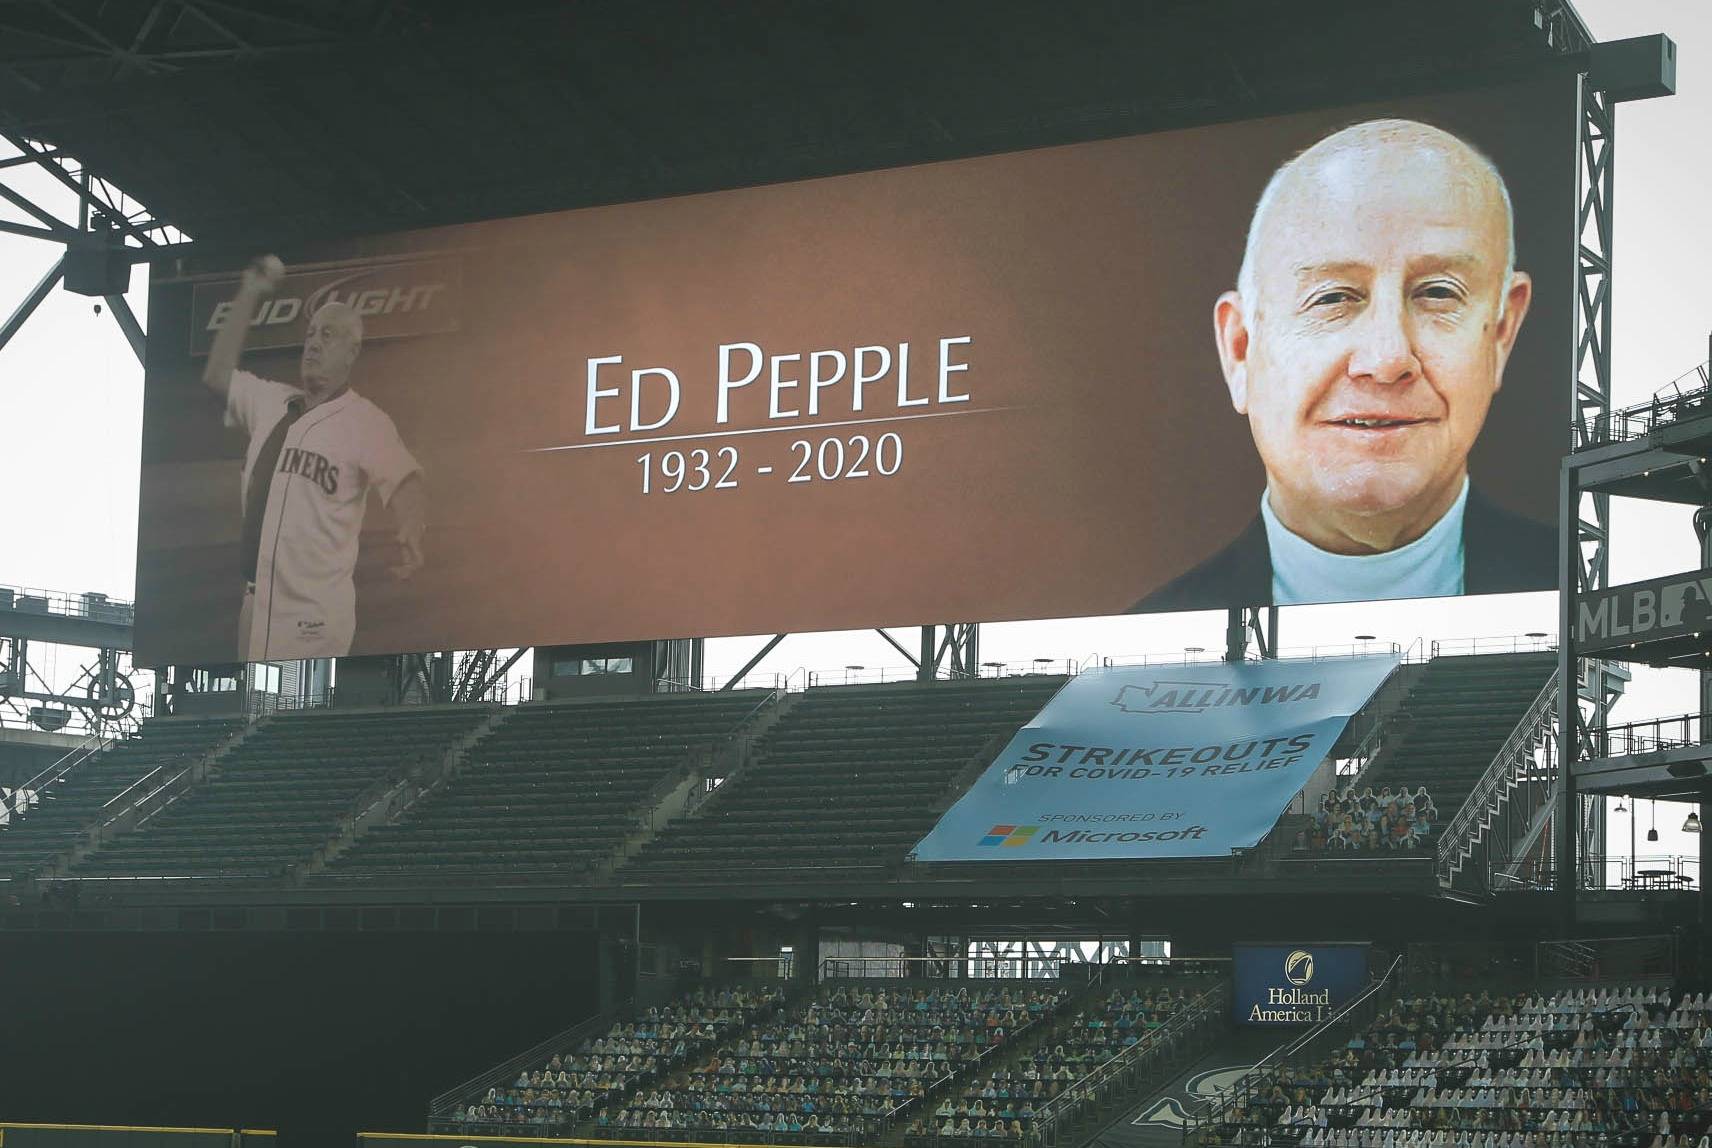 The Seattle Mariners honored Ed Pepple, who threw out the first pitch at a game after he retired. Seattle Mariners Twitter